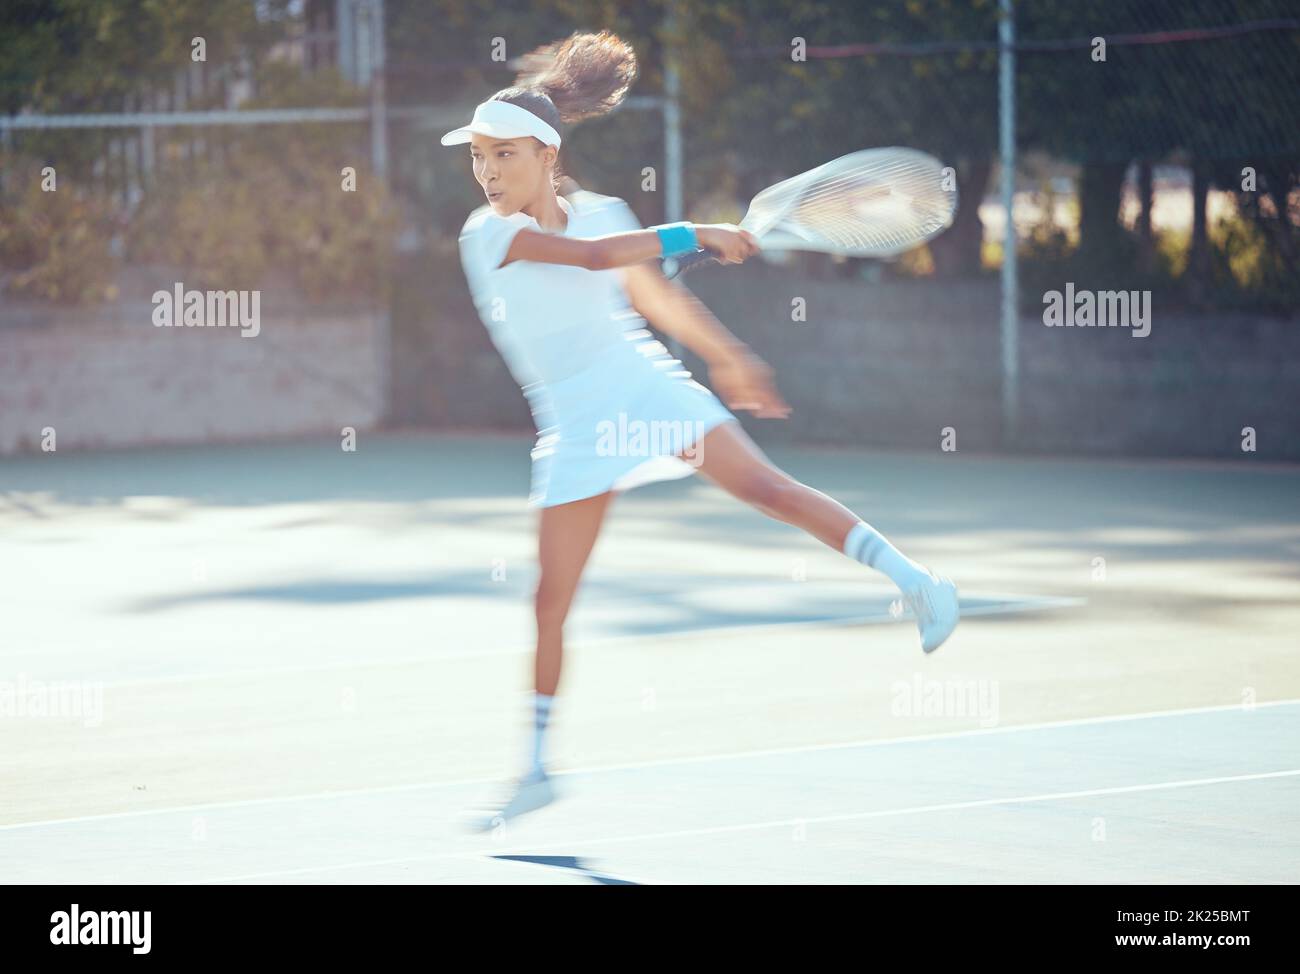 Tennis, action and active woman athlete playing sports, fitness and workout on game court. Training, motion and professional tennis player using Stock Photo